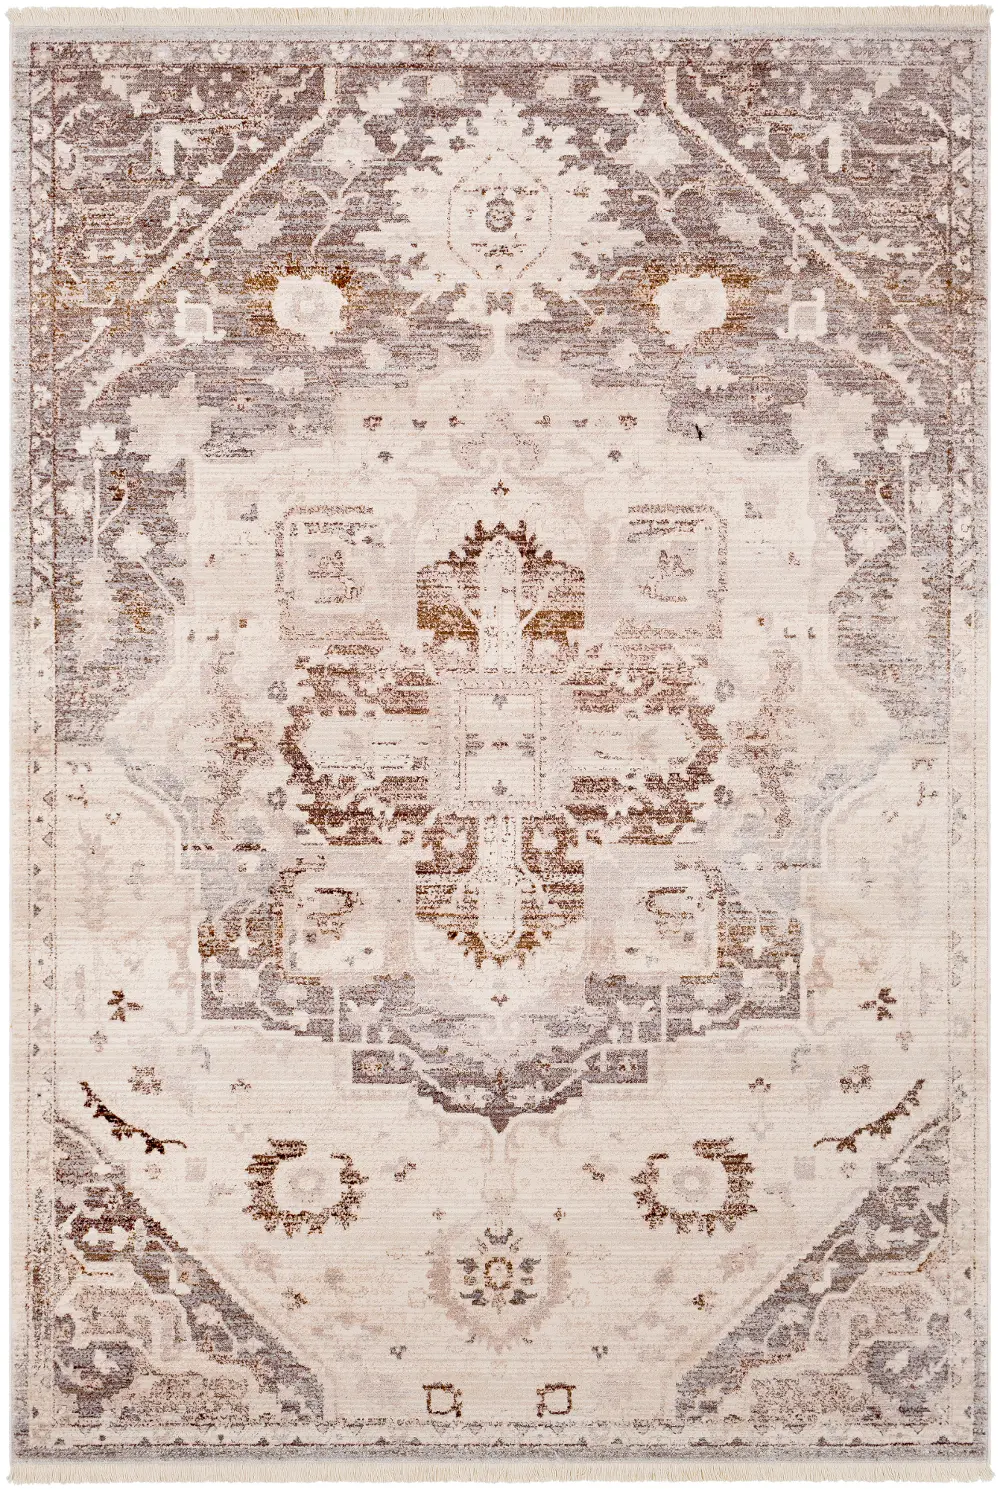 3 x 5 Small Beige, Brown and Gray Area Rug - Ephesians-1